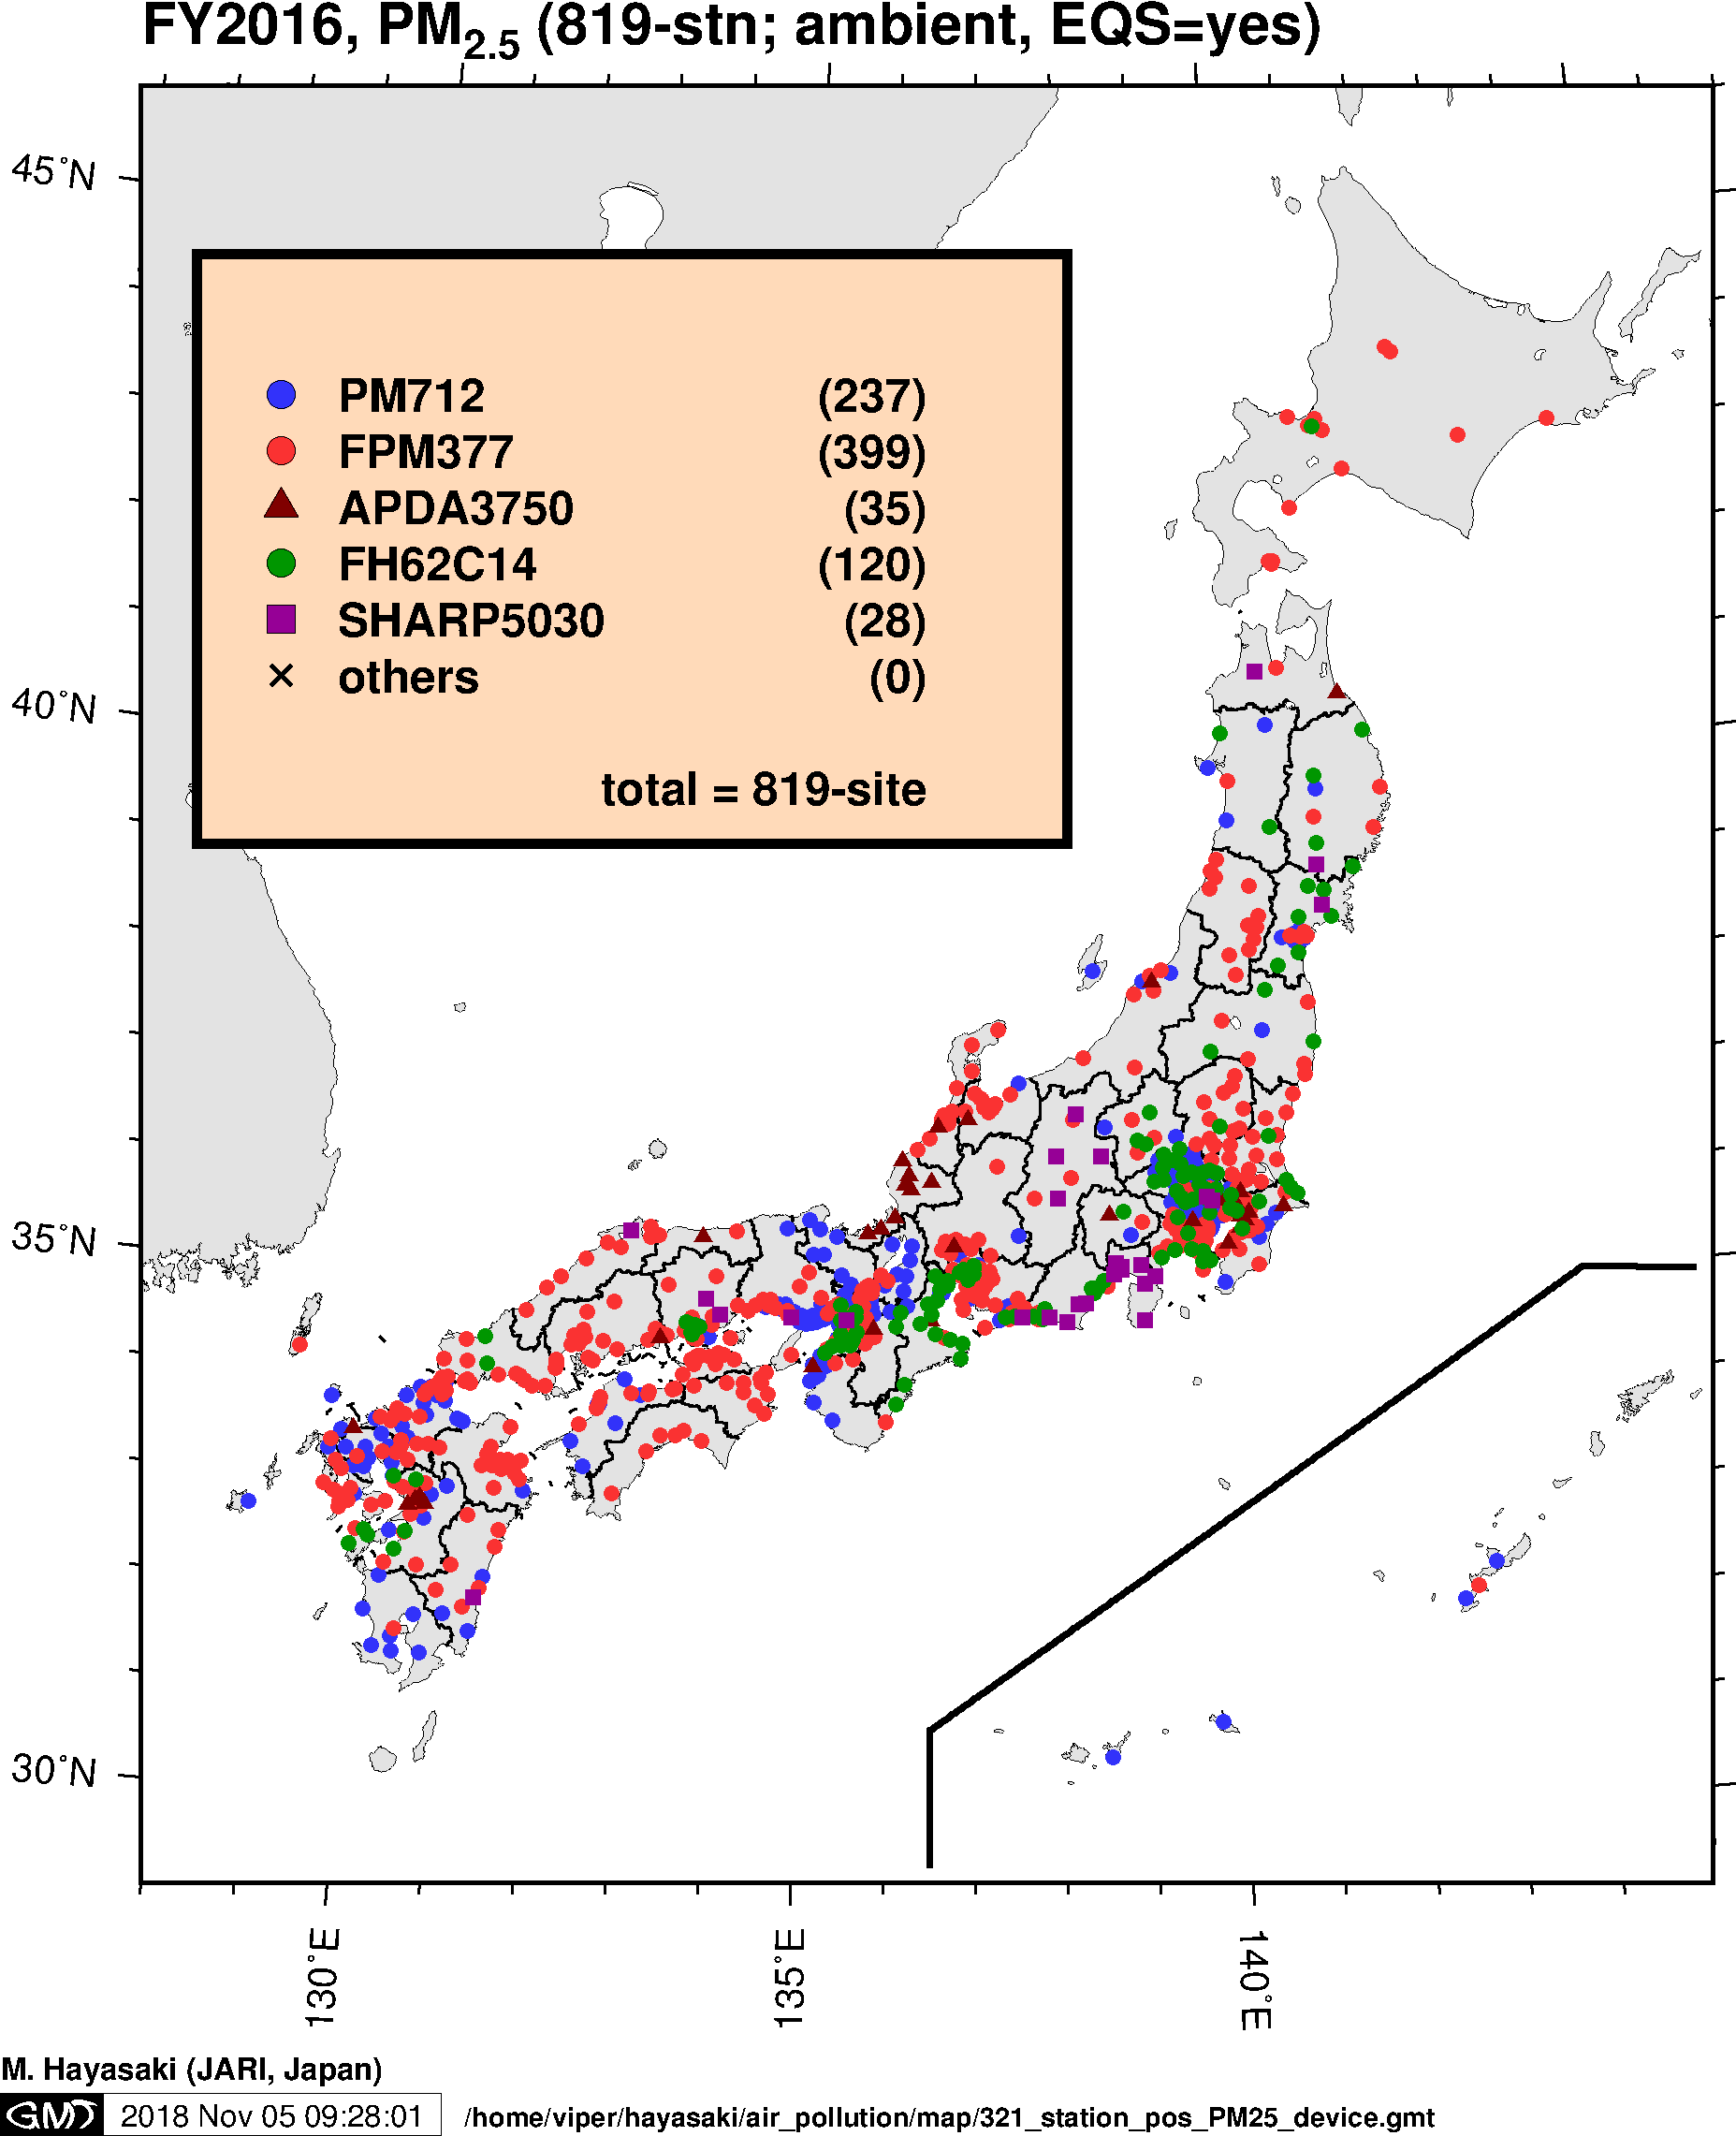 PM2.5 Monitoring devices in Japan